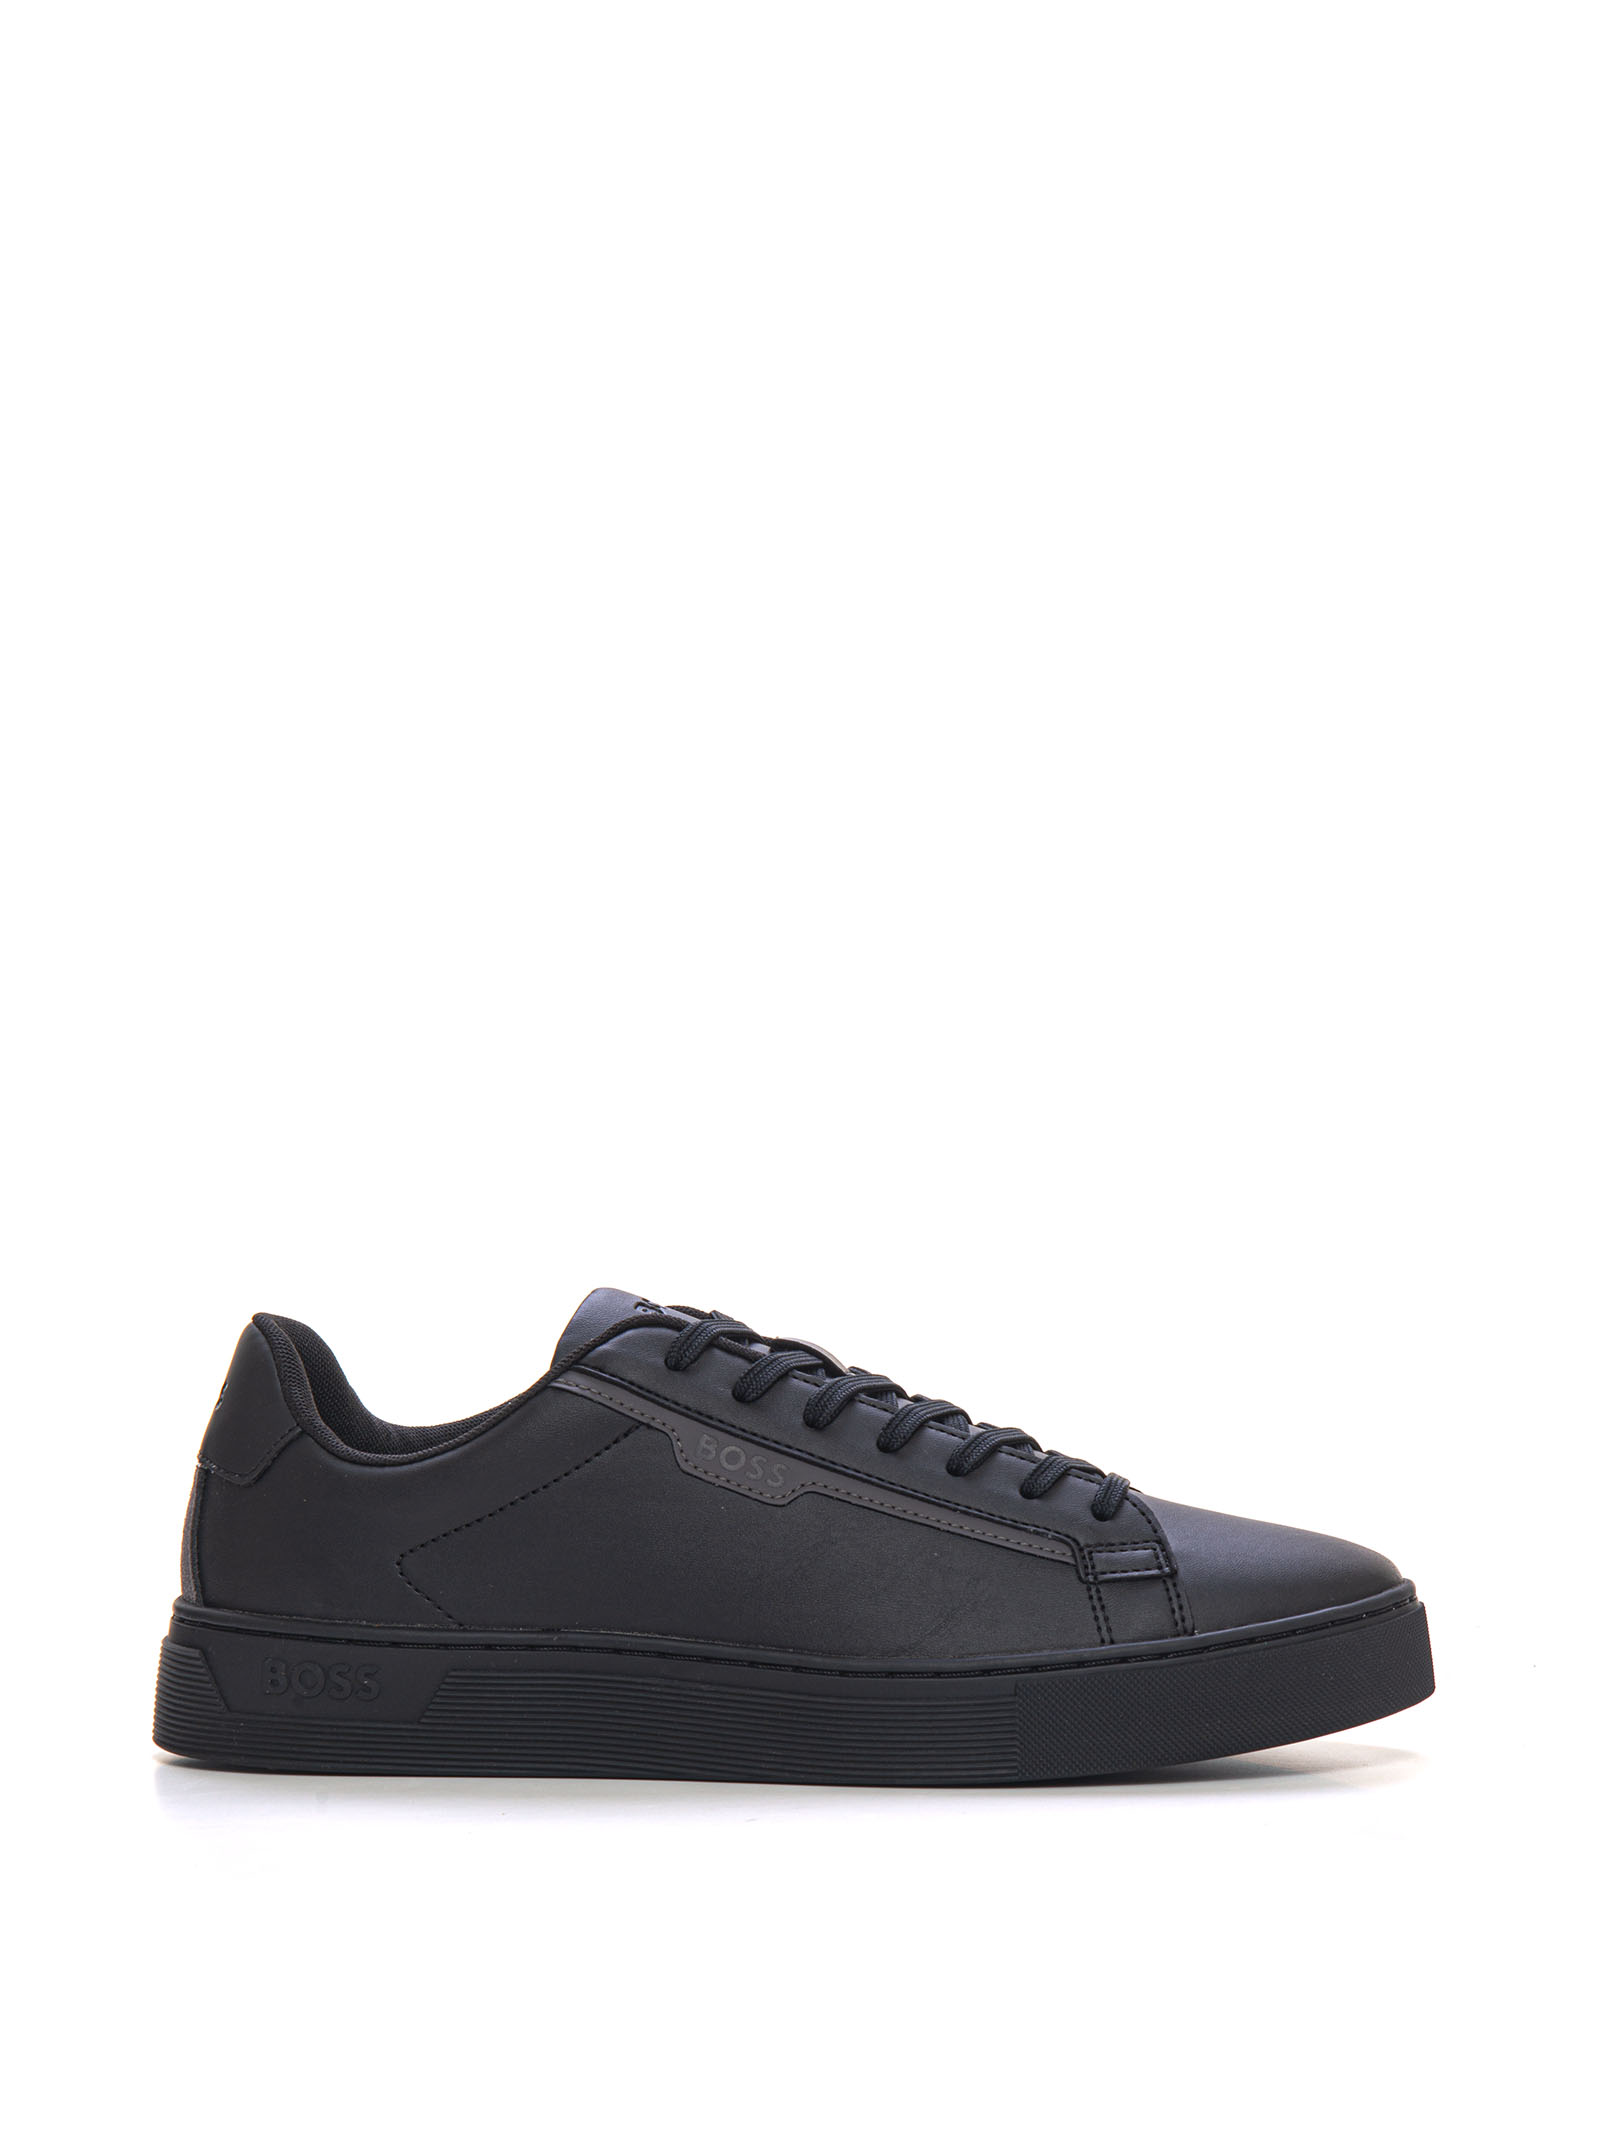 Hugo Boss Rhys-tenn-pusdth Leather Sneakers With Laces In Black